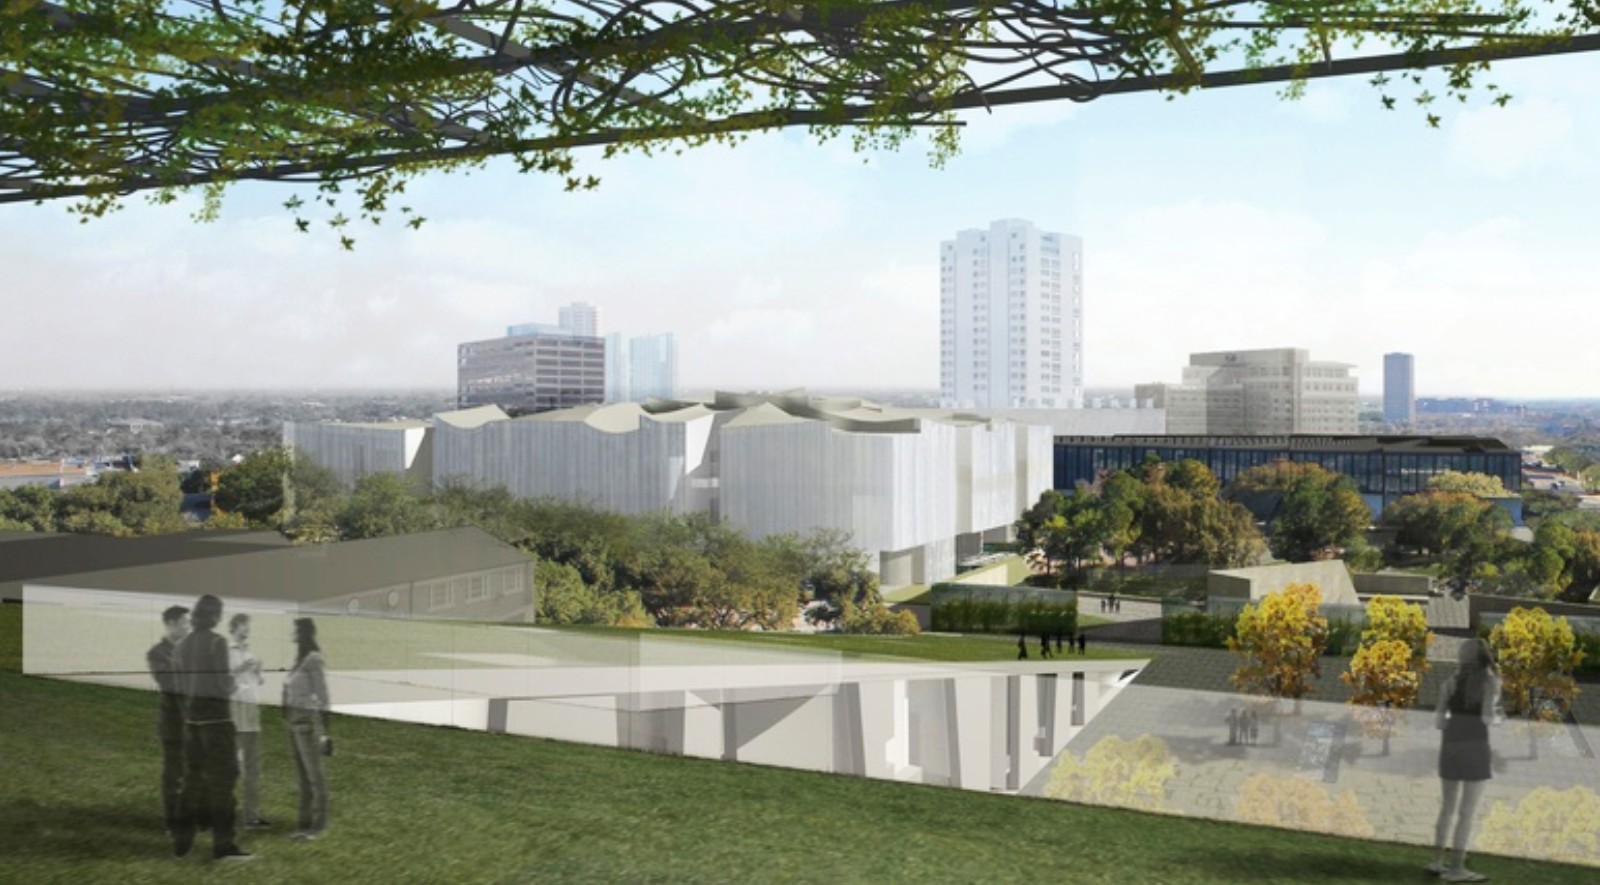 New campus of Museum of Fine Arts in Houston